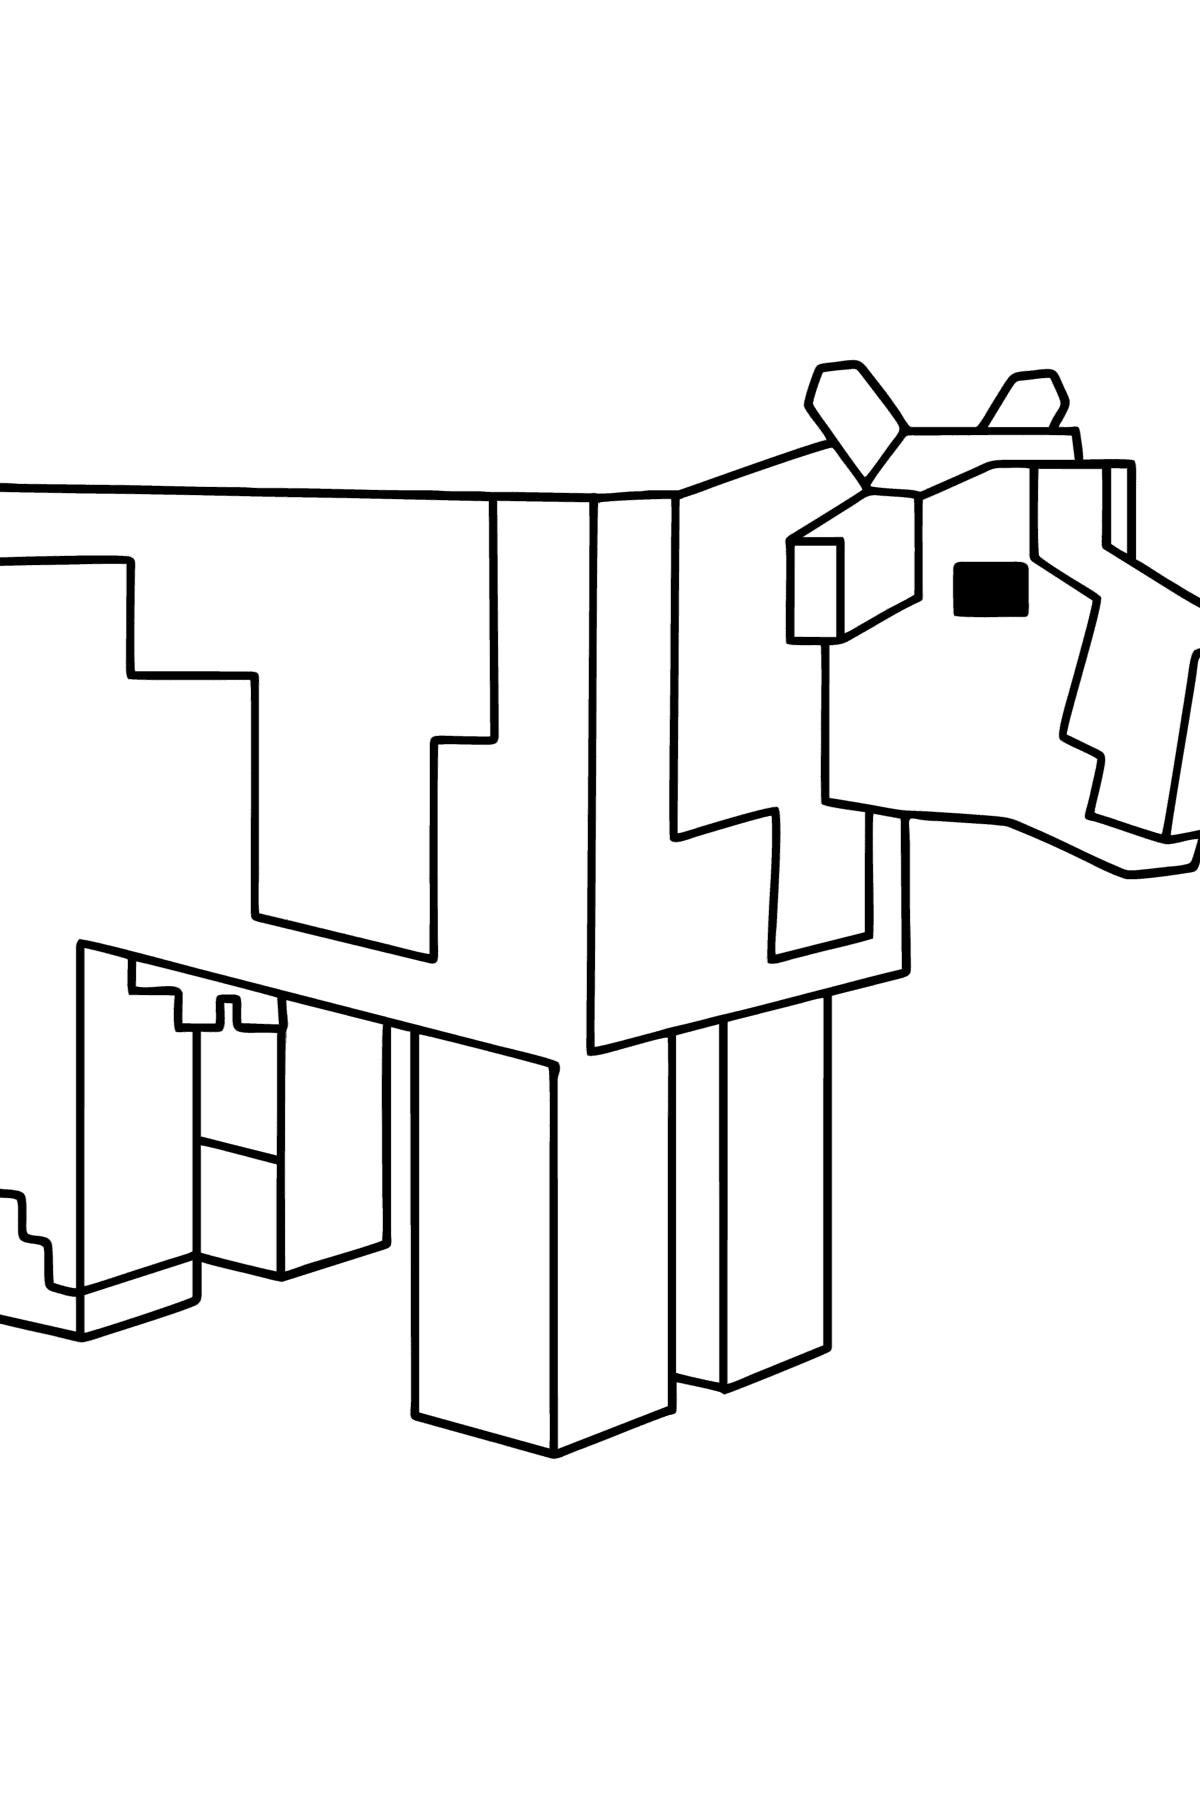 Minecraft Cow coloring page - Coloring Pages for Kids